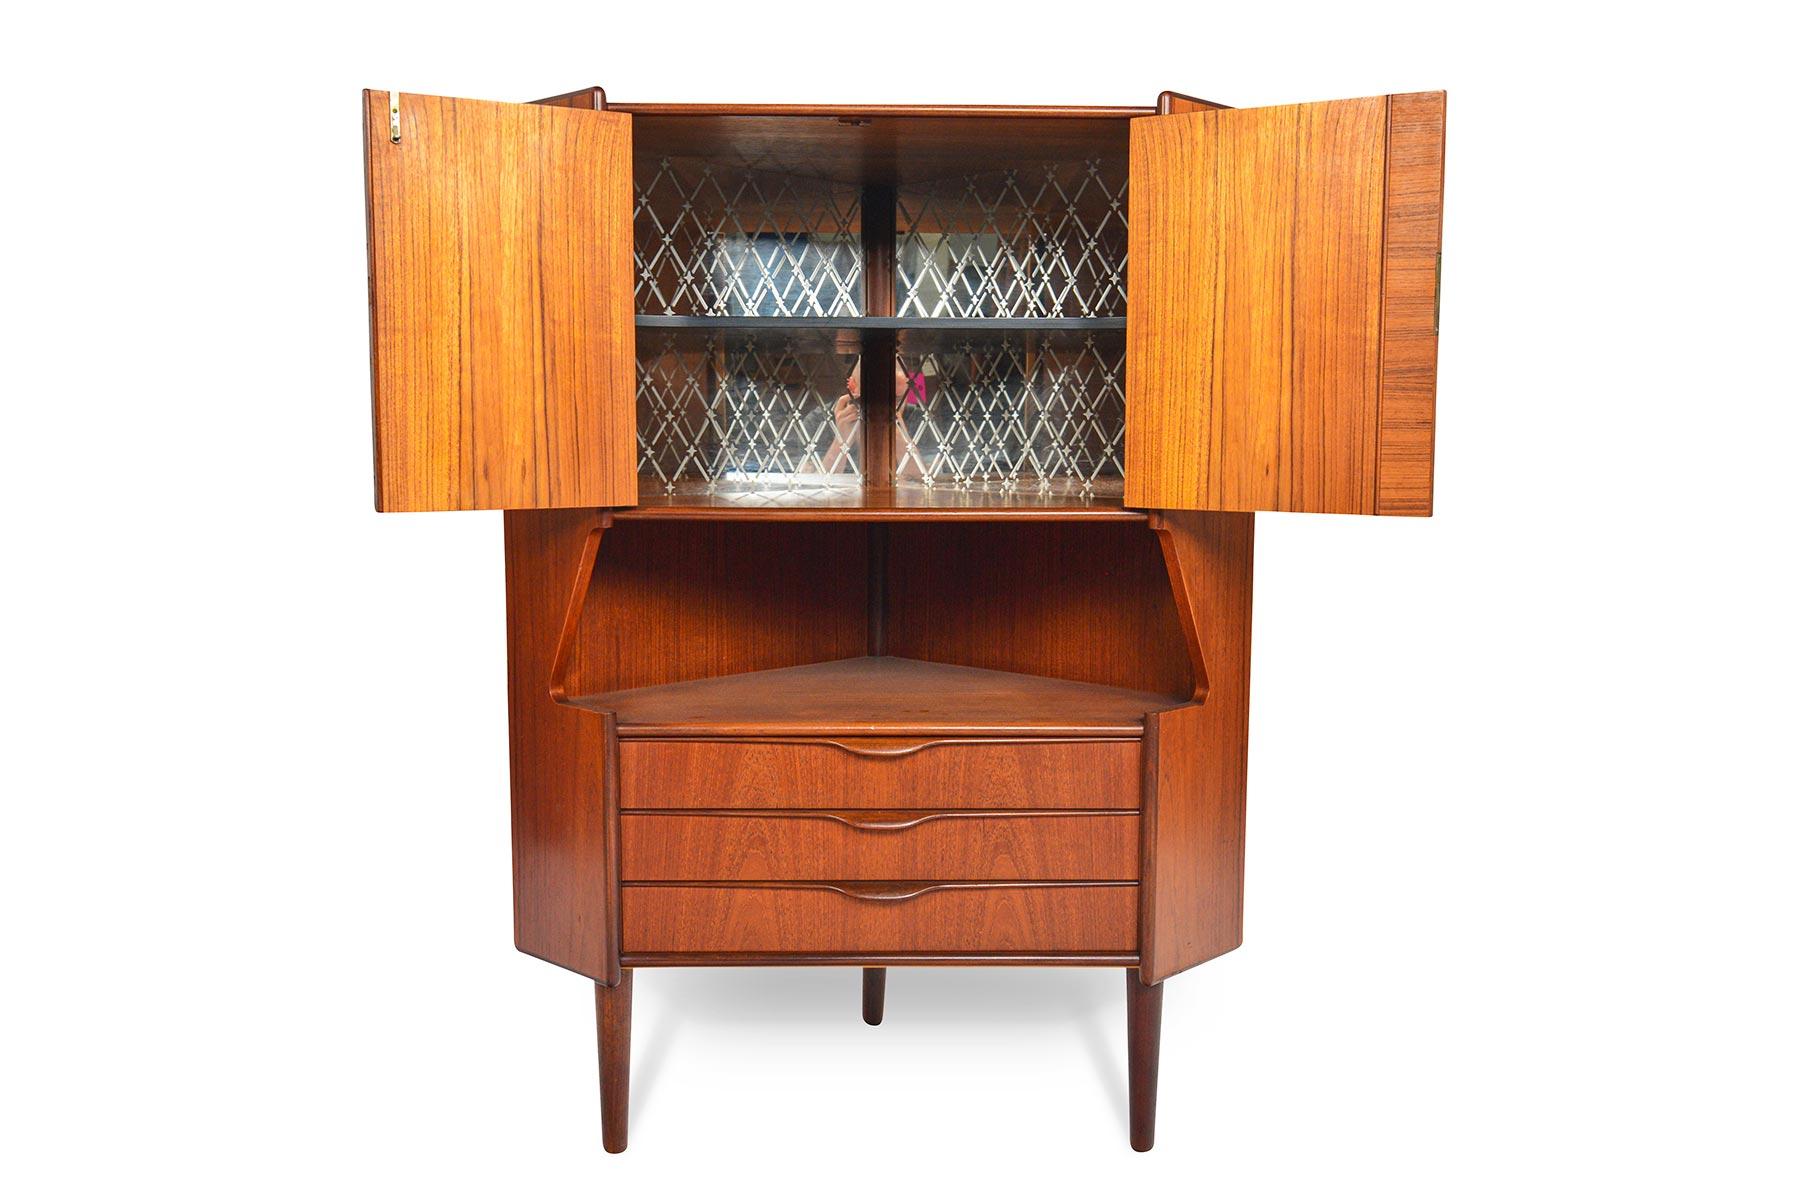 This fabulous Danish modern midcentury corner bar in teak will brighten up any modern home. Designed by Gunni Omann for Omann Jun Møbelfabrik in the 1960s, this sharp piece features two locking cabinet doors which open to an etched, mirror backed